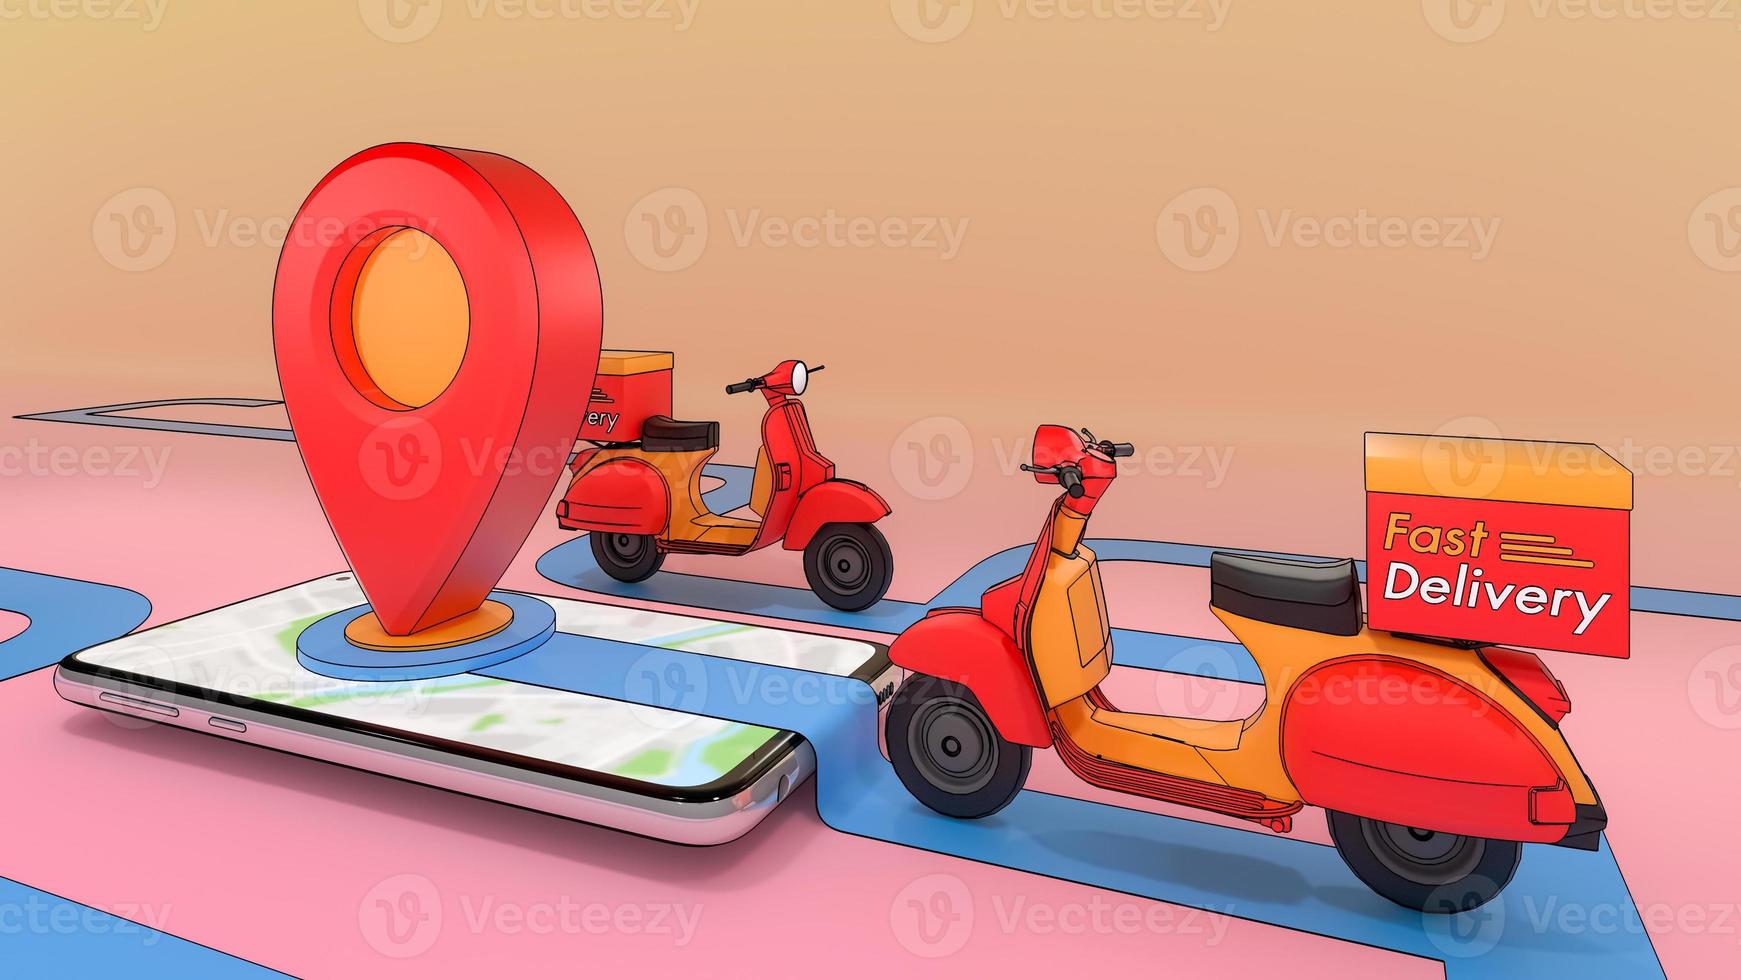 Scooter of ejected from a mobile phone.,Online mobile application order transportation service.,Concept of fast delivery service and Shopping online.,3d illustration with object clipping path. photo